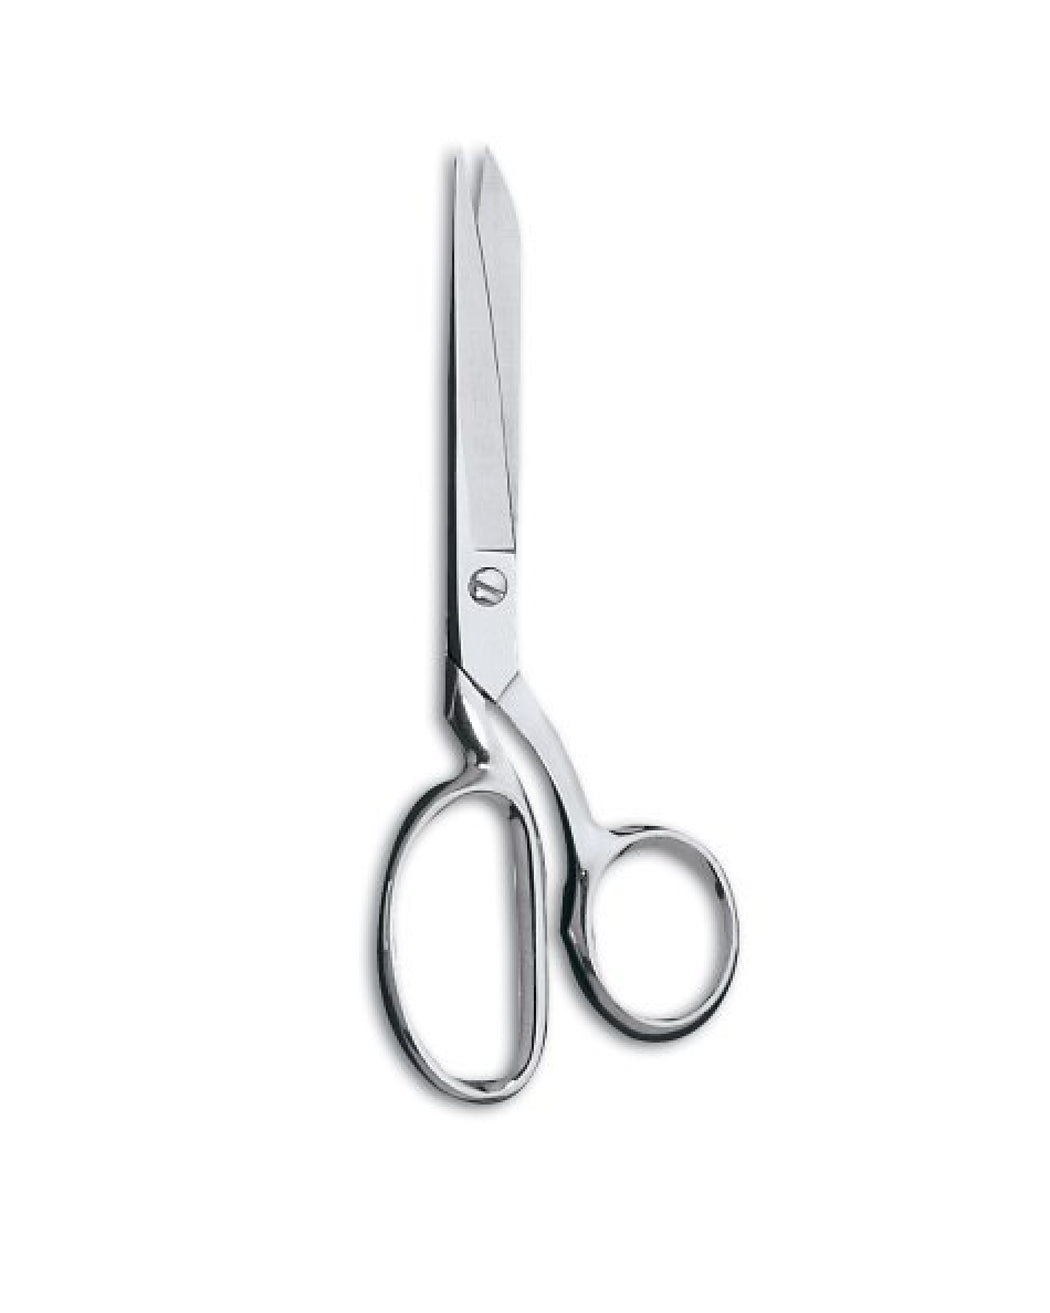 Classic Forged 7" Dressmaker Shears - Zipper and Thread